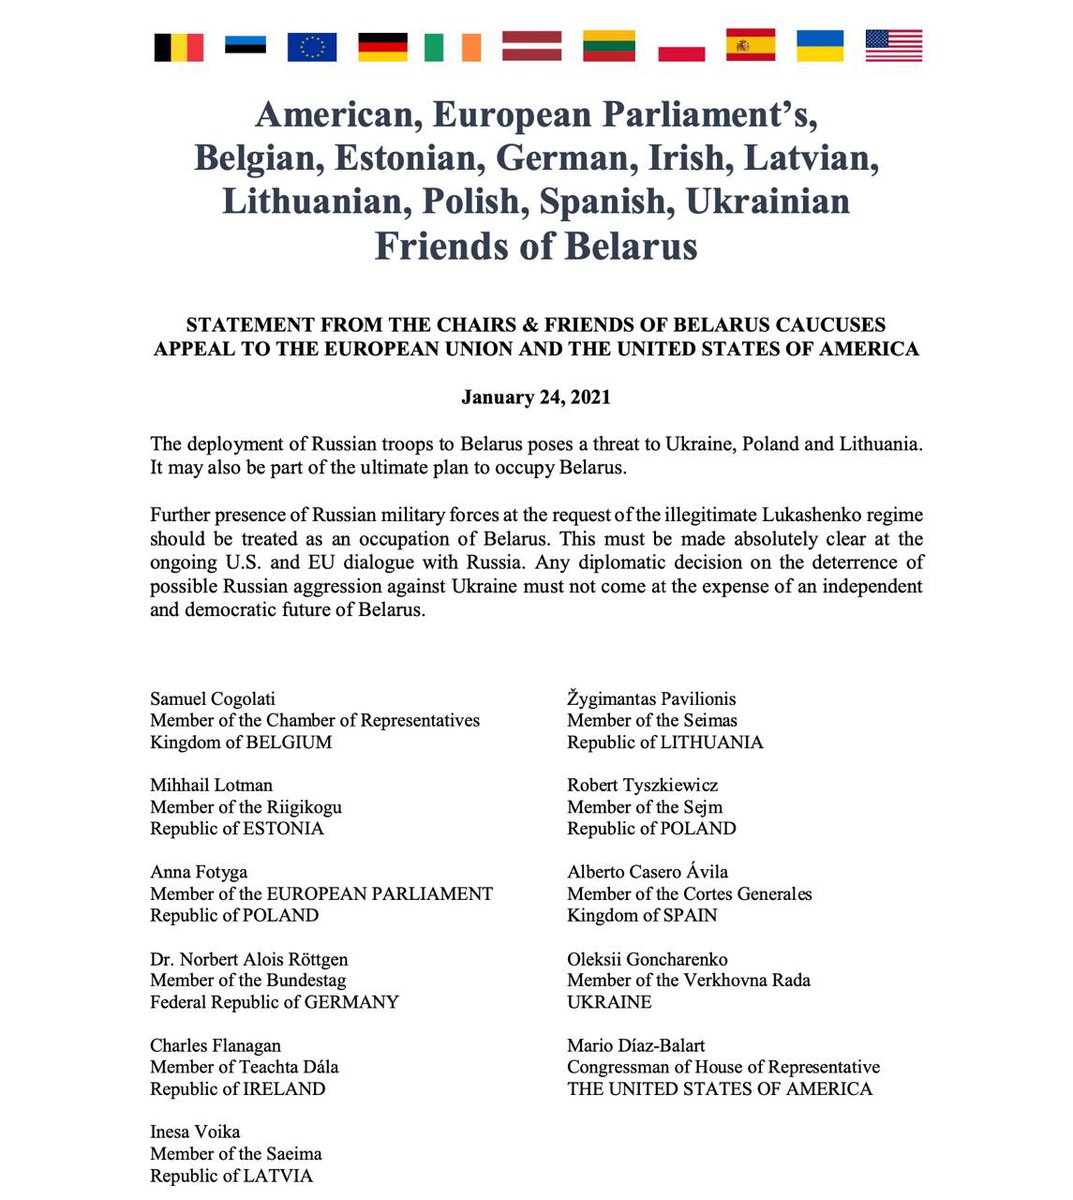 Parliamentarians of 11 countries issued a joint statement on the entry of Russian troops into Belarus. The statement says that the deployment of Russian troops in Belarus not only poses a threat to Ukraine,Poland and Lithuania, but could also be a part of a plan to occupy Belarus